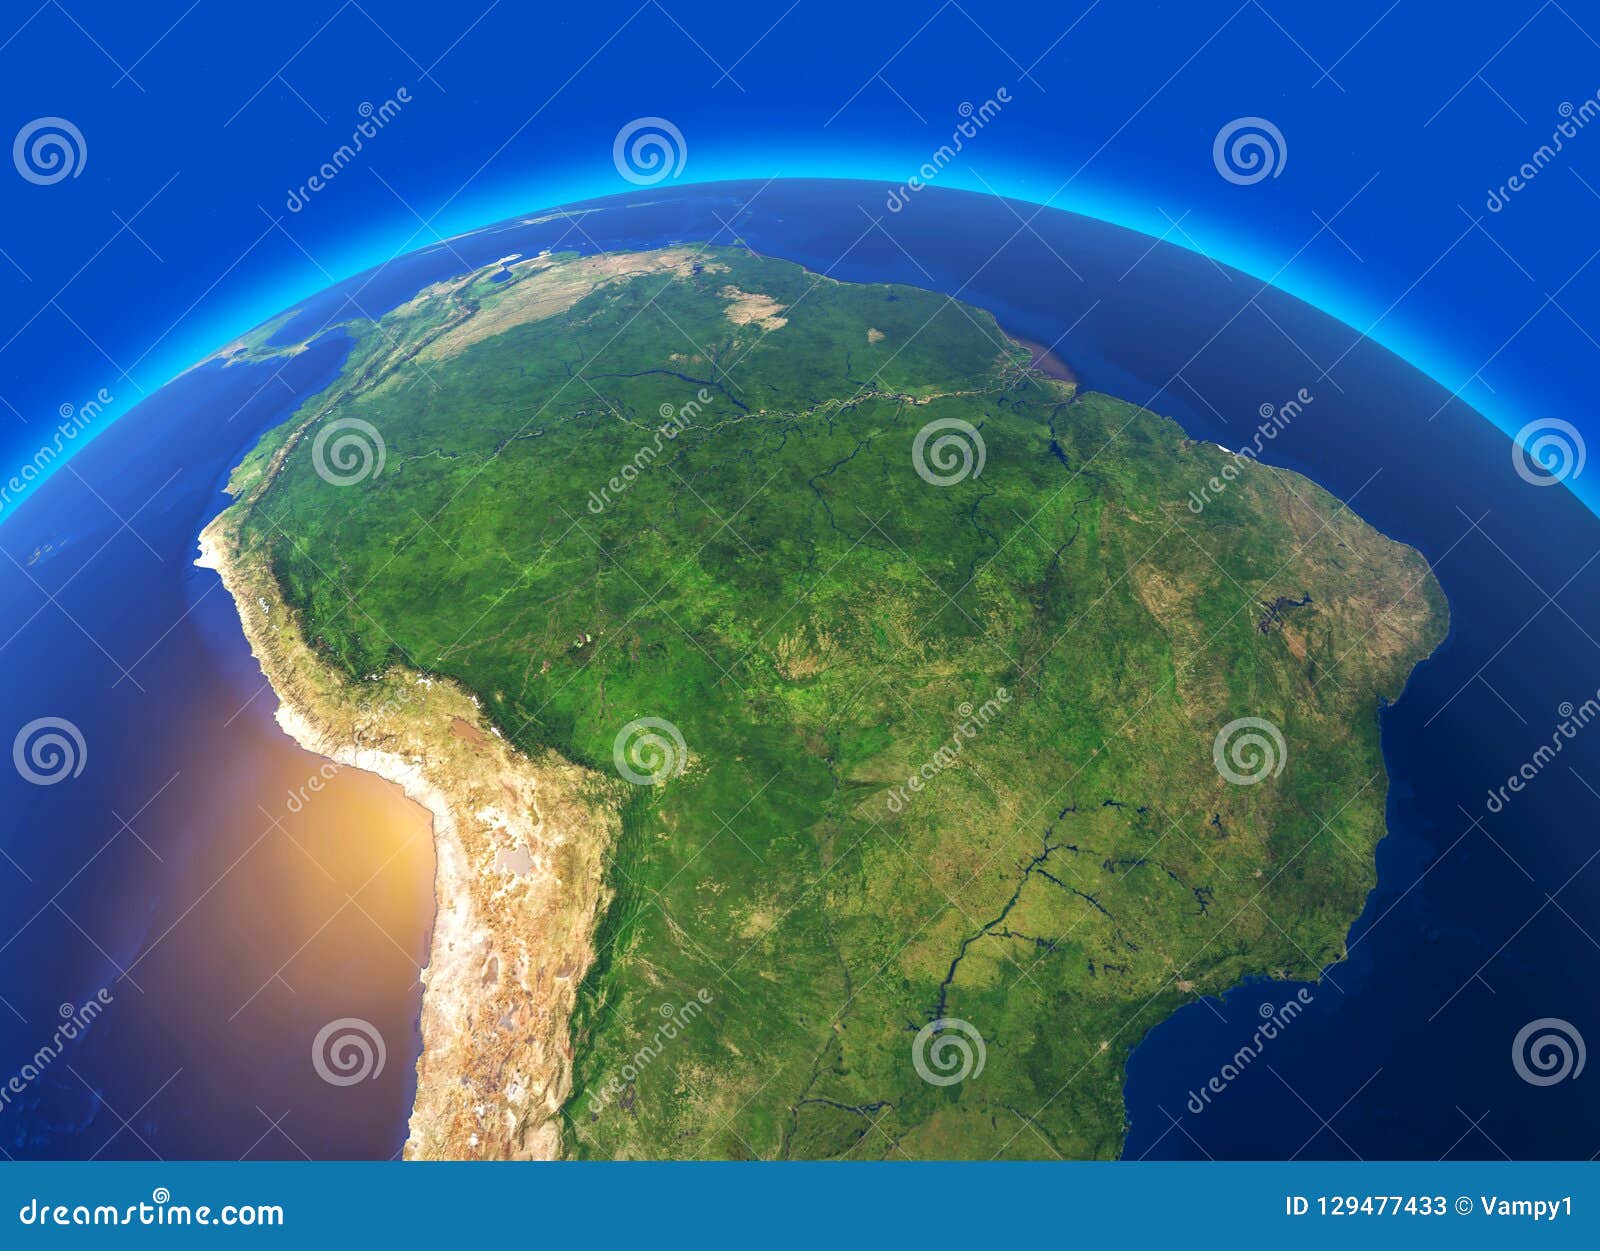 satellite view of the amazon, map, states of south america, reliefs and plains, physical map